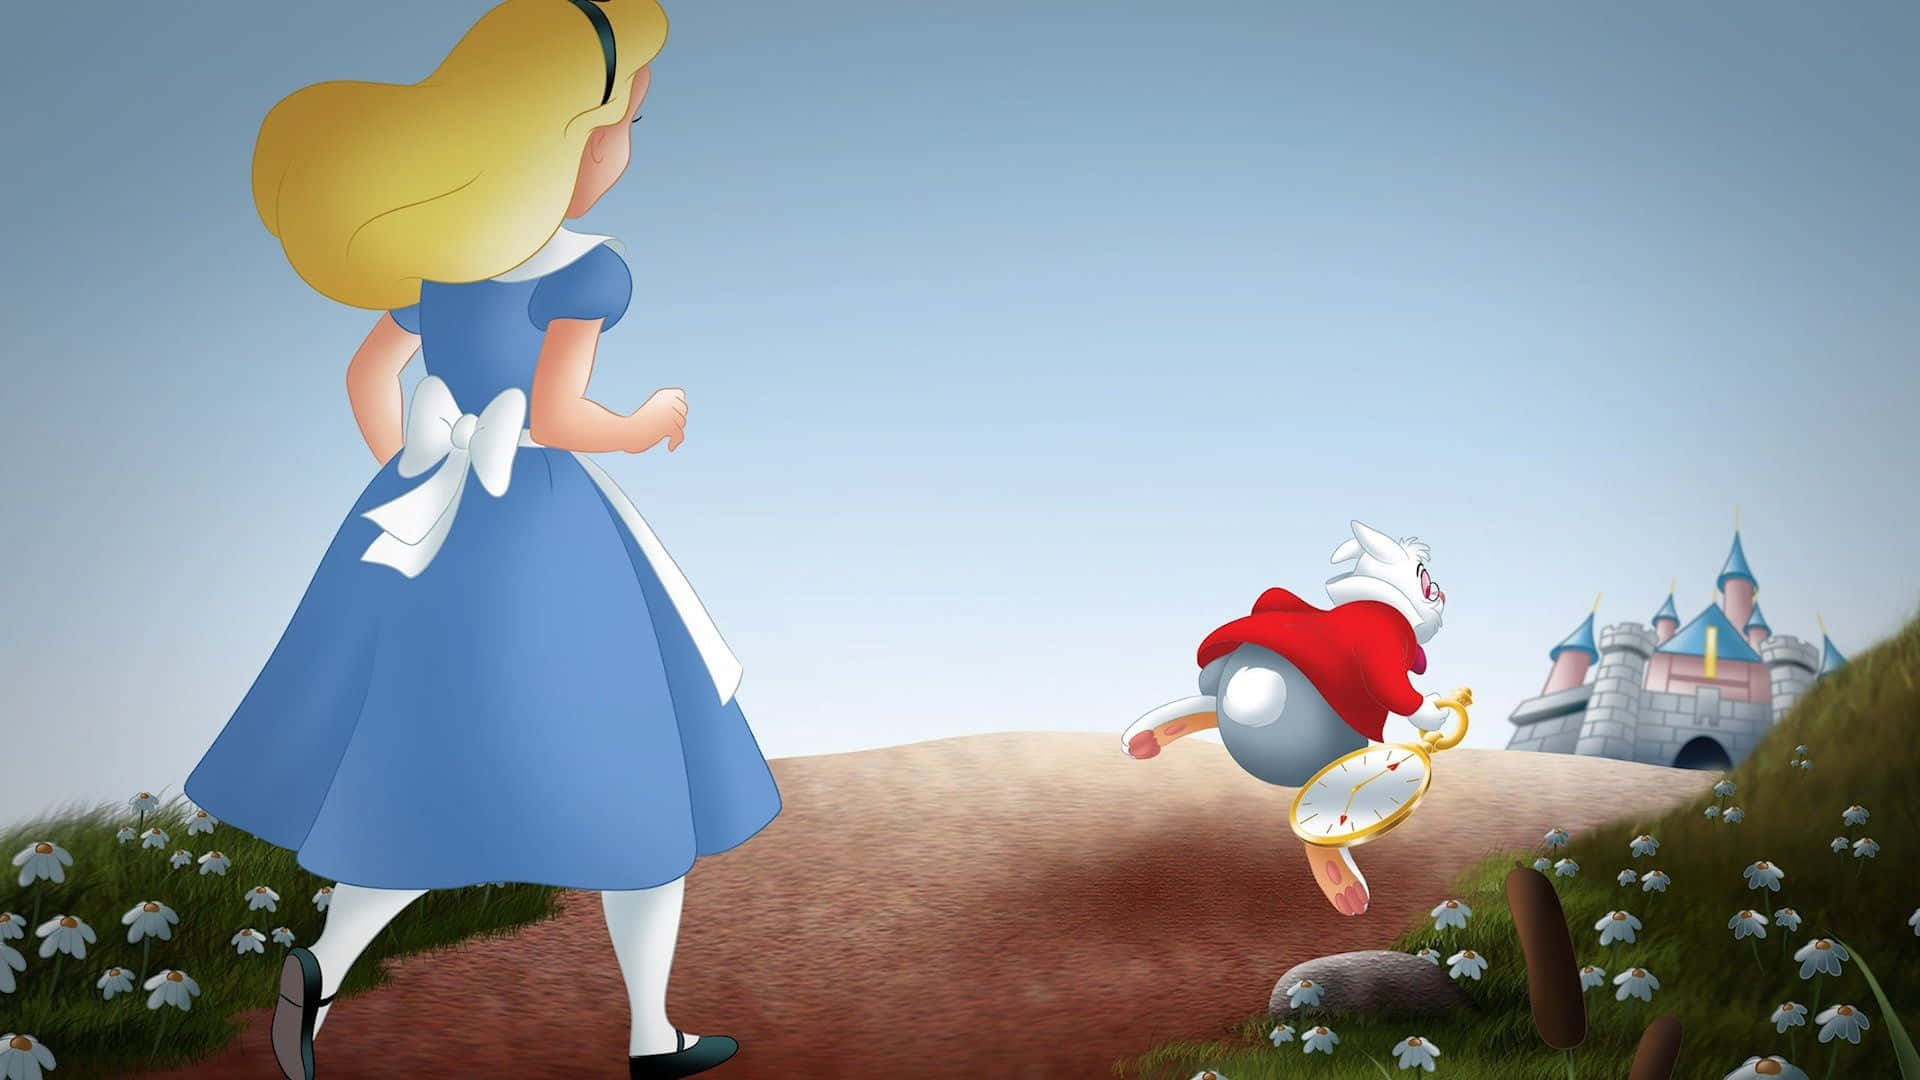 Follow Alice Down the Rabbit Hole to the Magical Wonderland